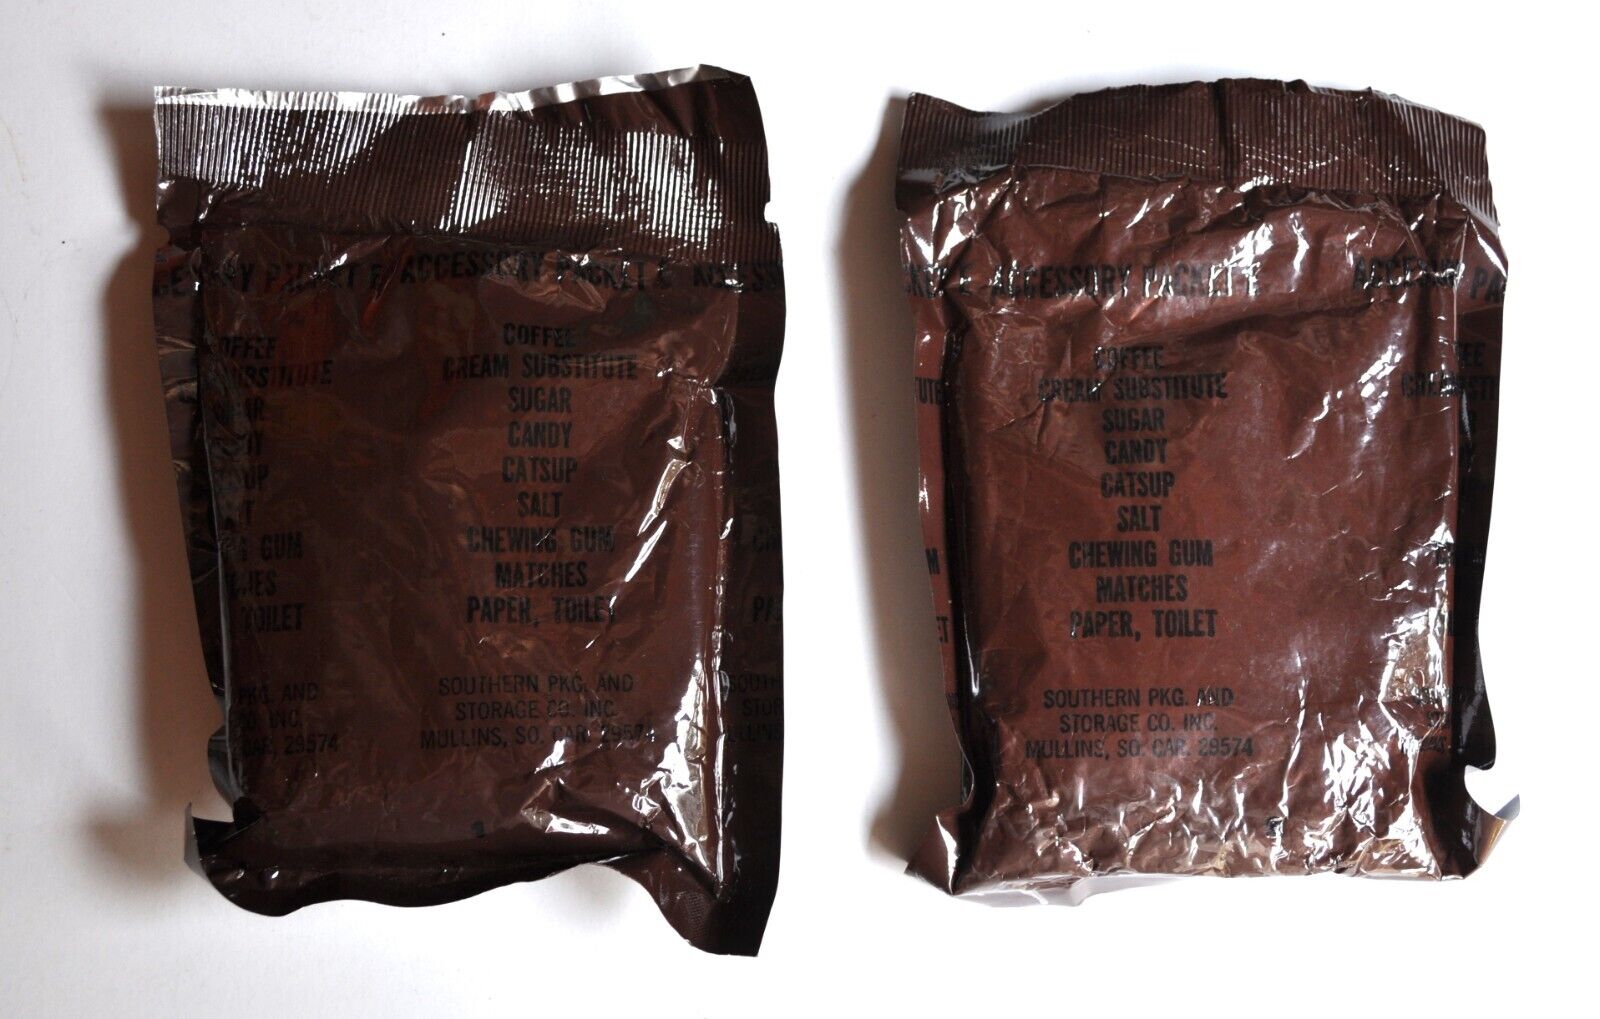 Two Original Vintage US MRE Brown Bag Accessory Packets. Complete and Unopened